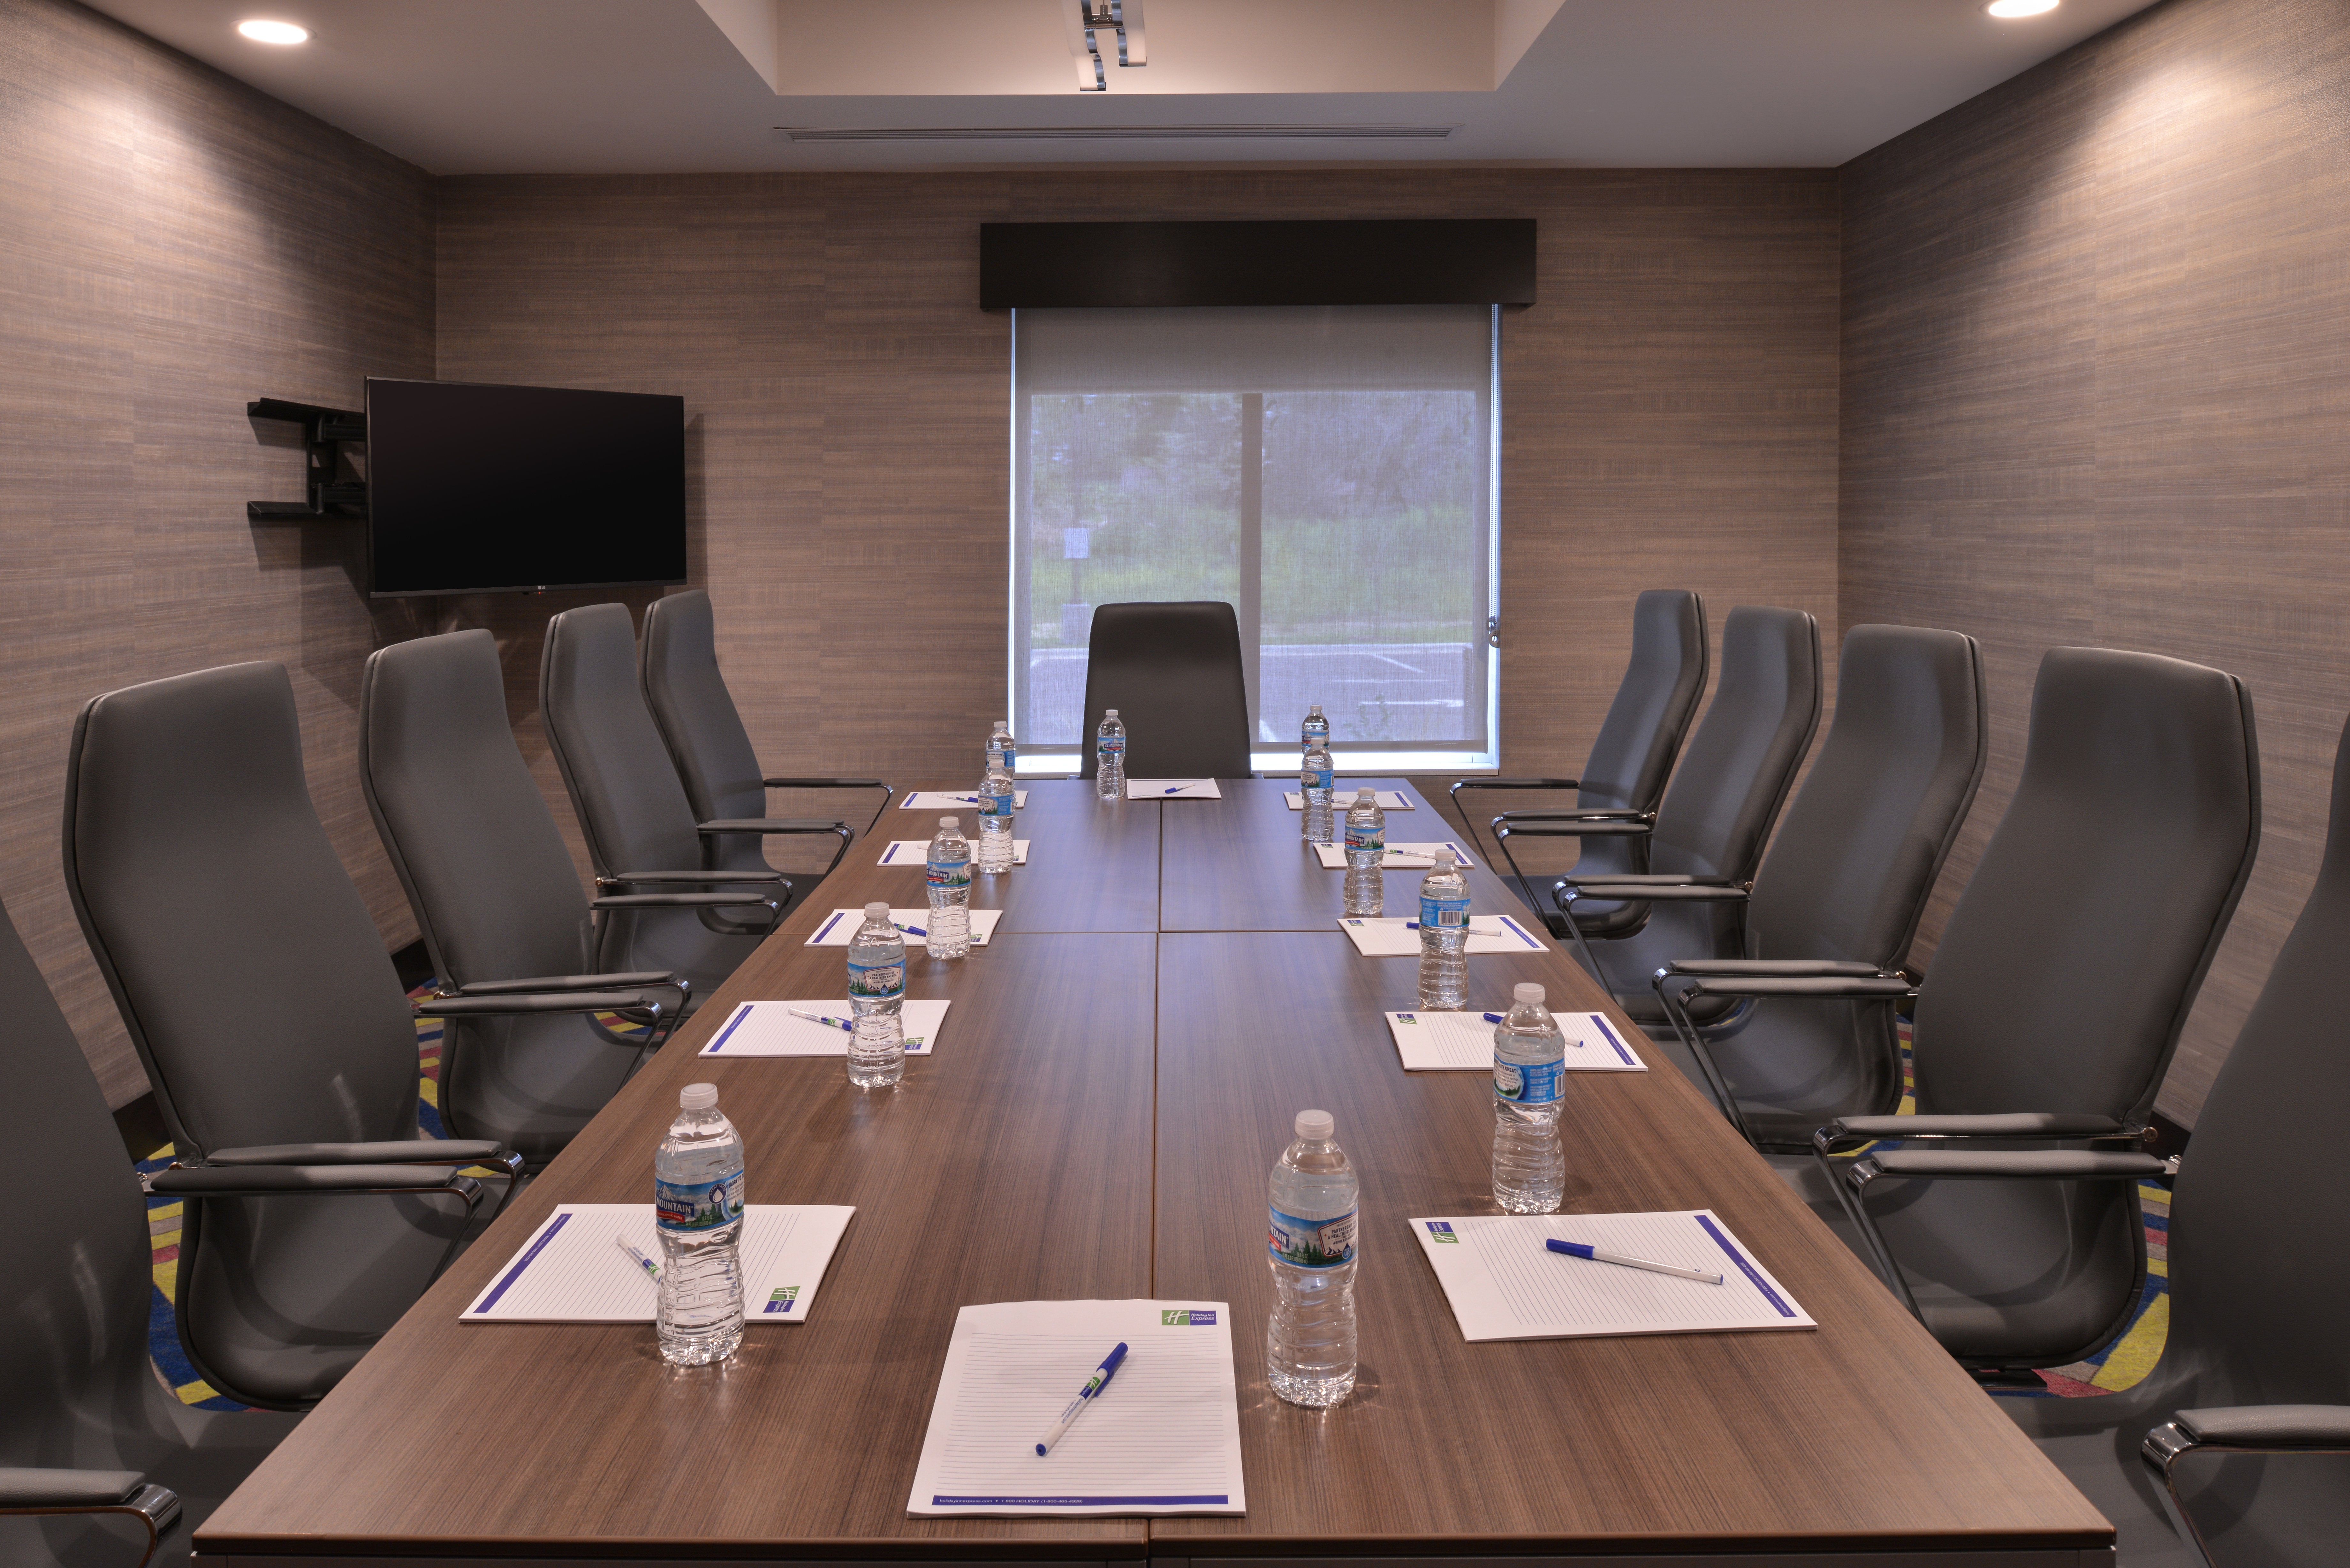 Plenty of space to for all your meeting needs